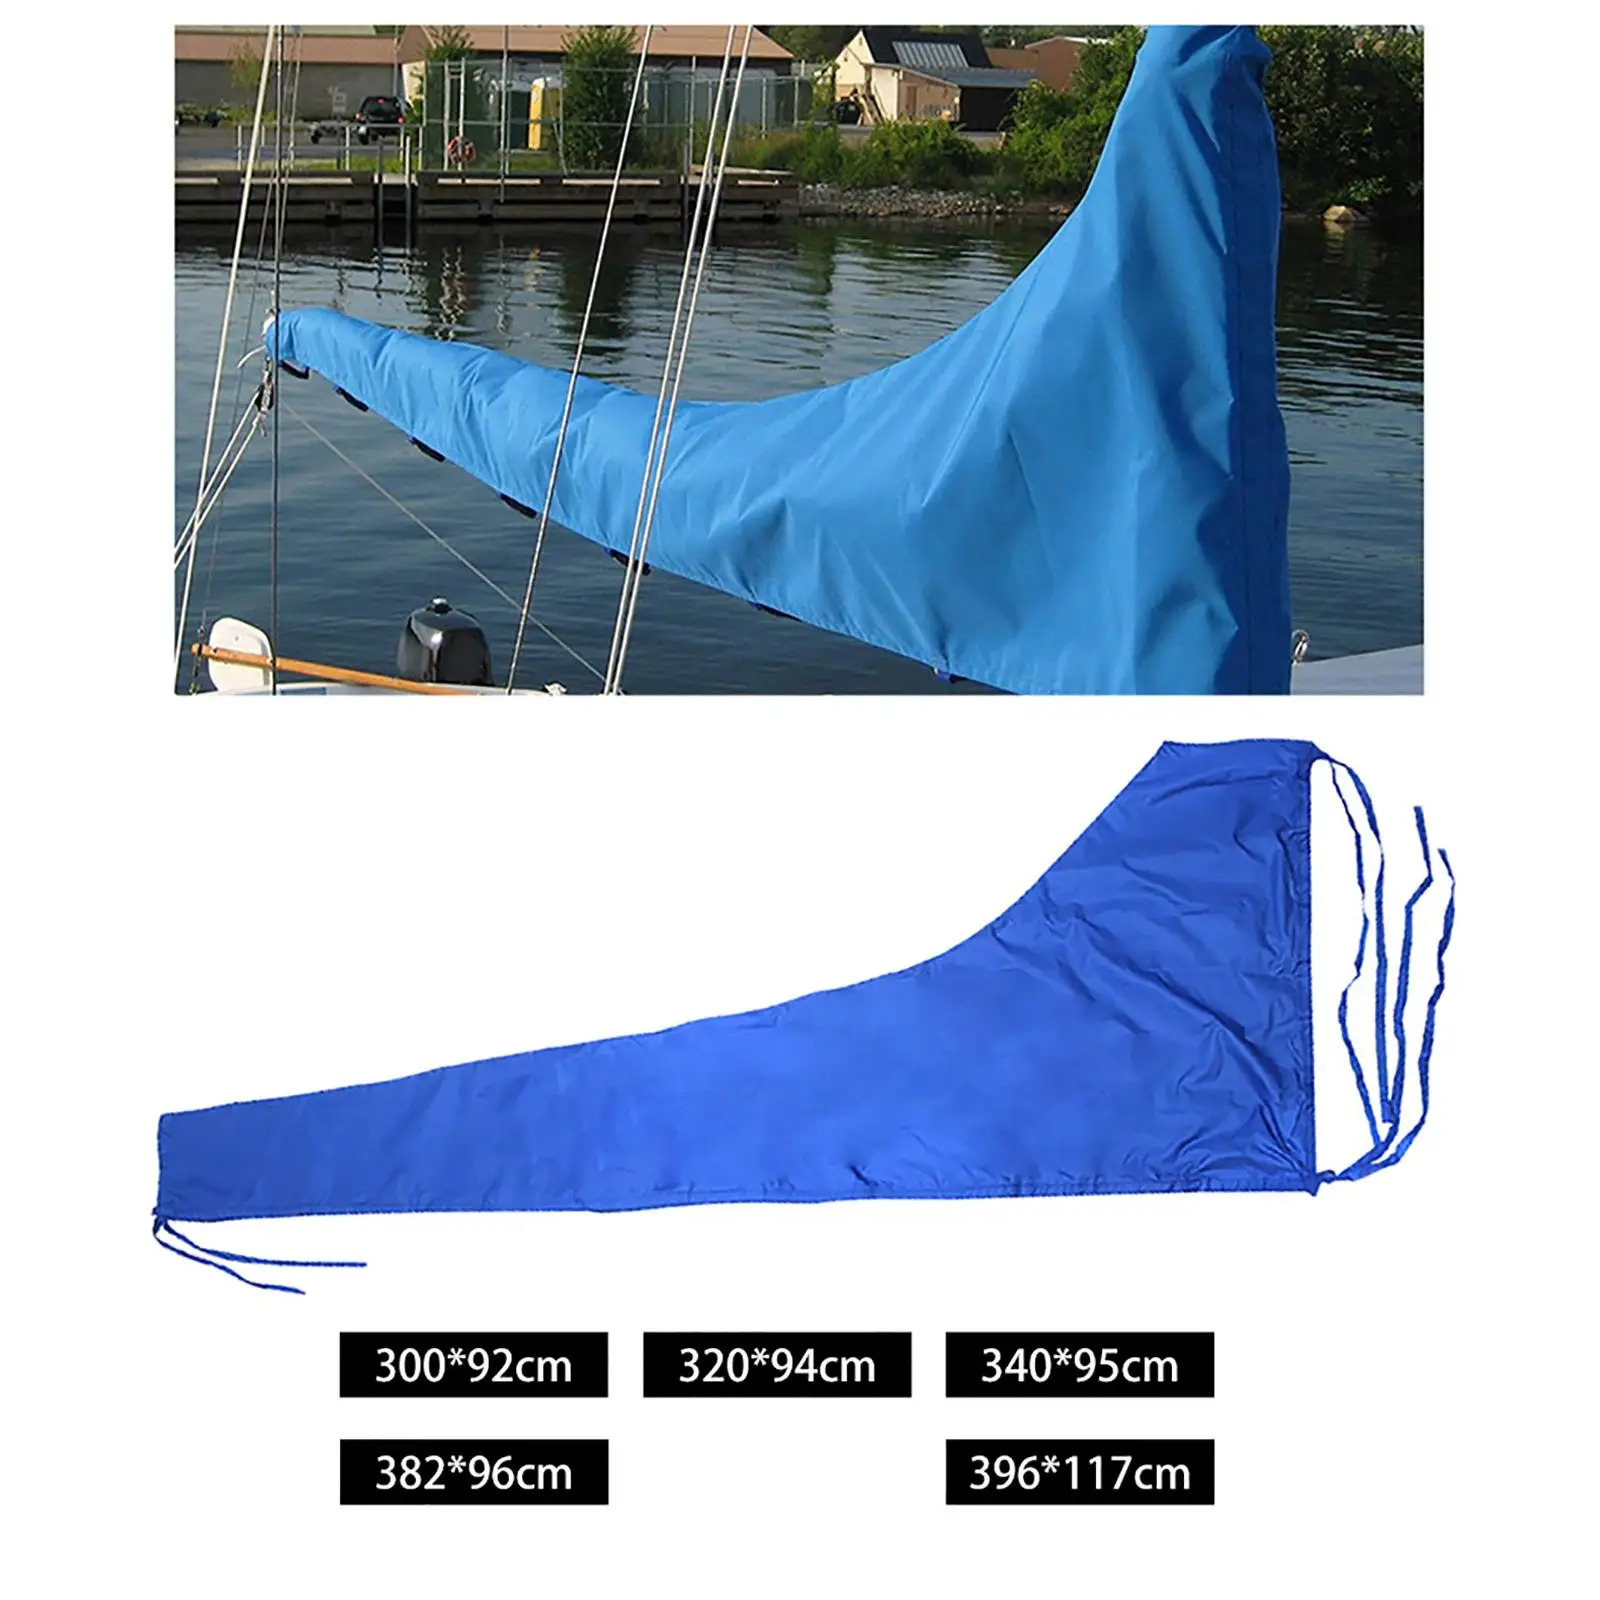 Waterproof Mainsail Boom Cover Anti UV Sunshade Anti Scratch Sail Cover Thickened Oxford Cloth Boat Accessories Adjustable Strap